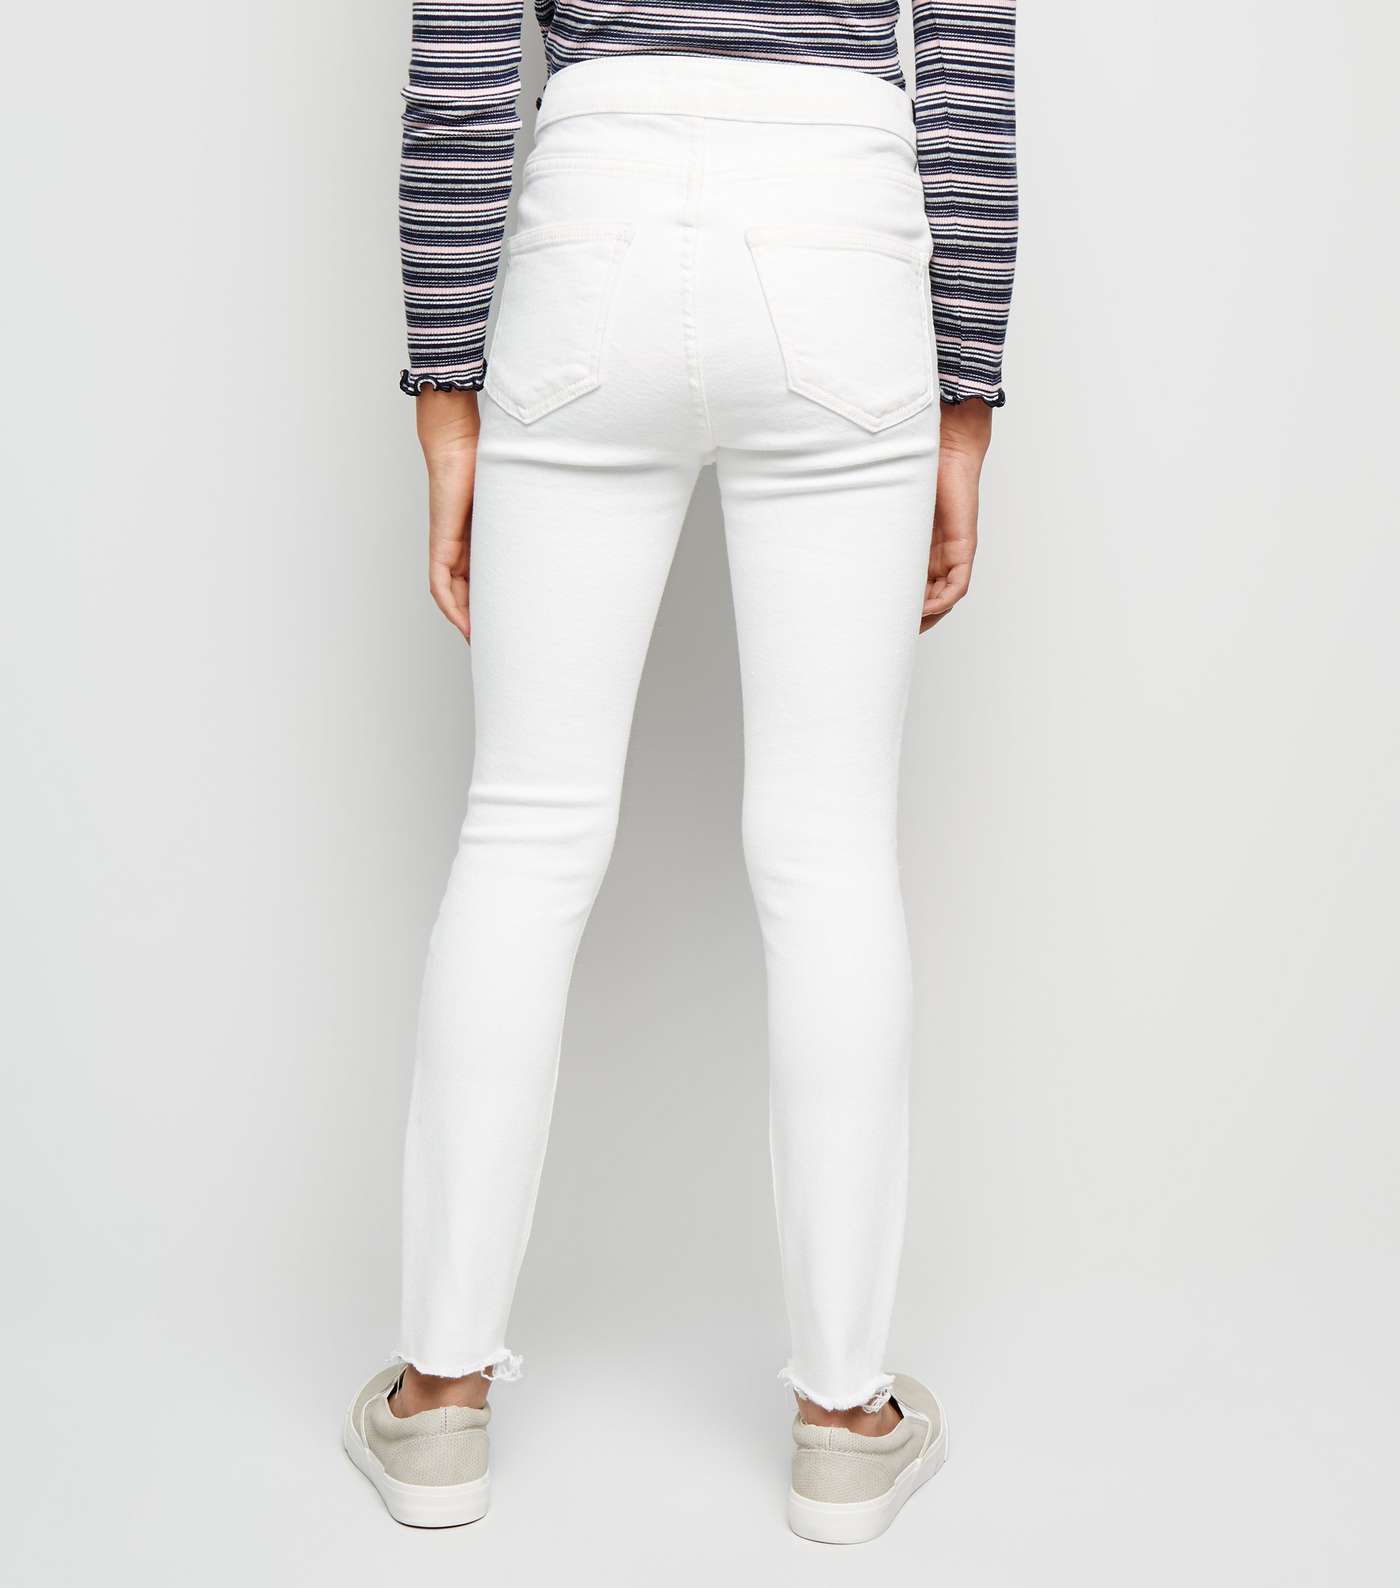 Girls White Ripped High Waist Skinny Jeans Image 3